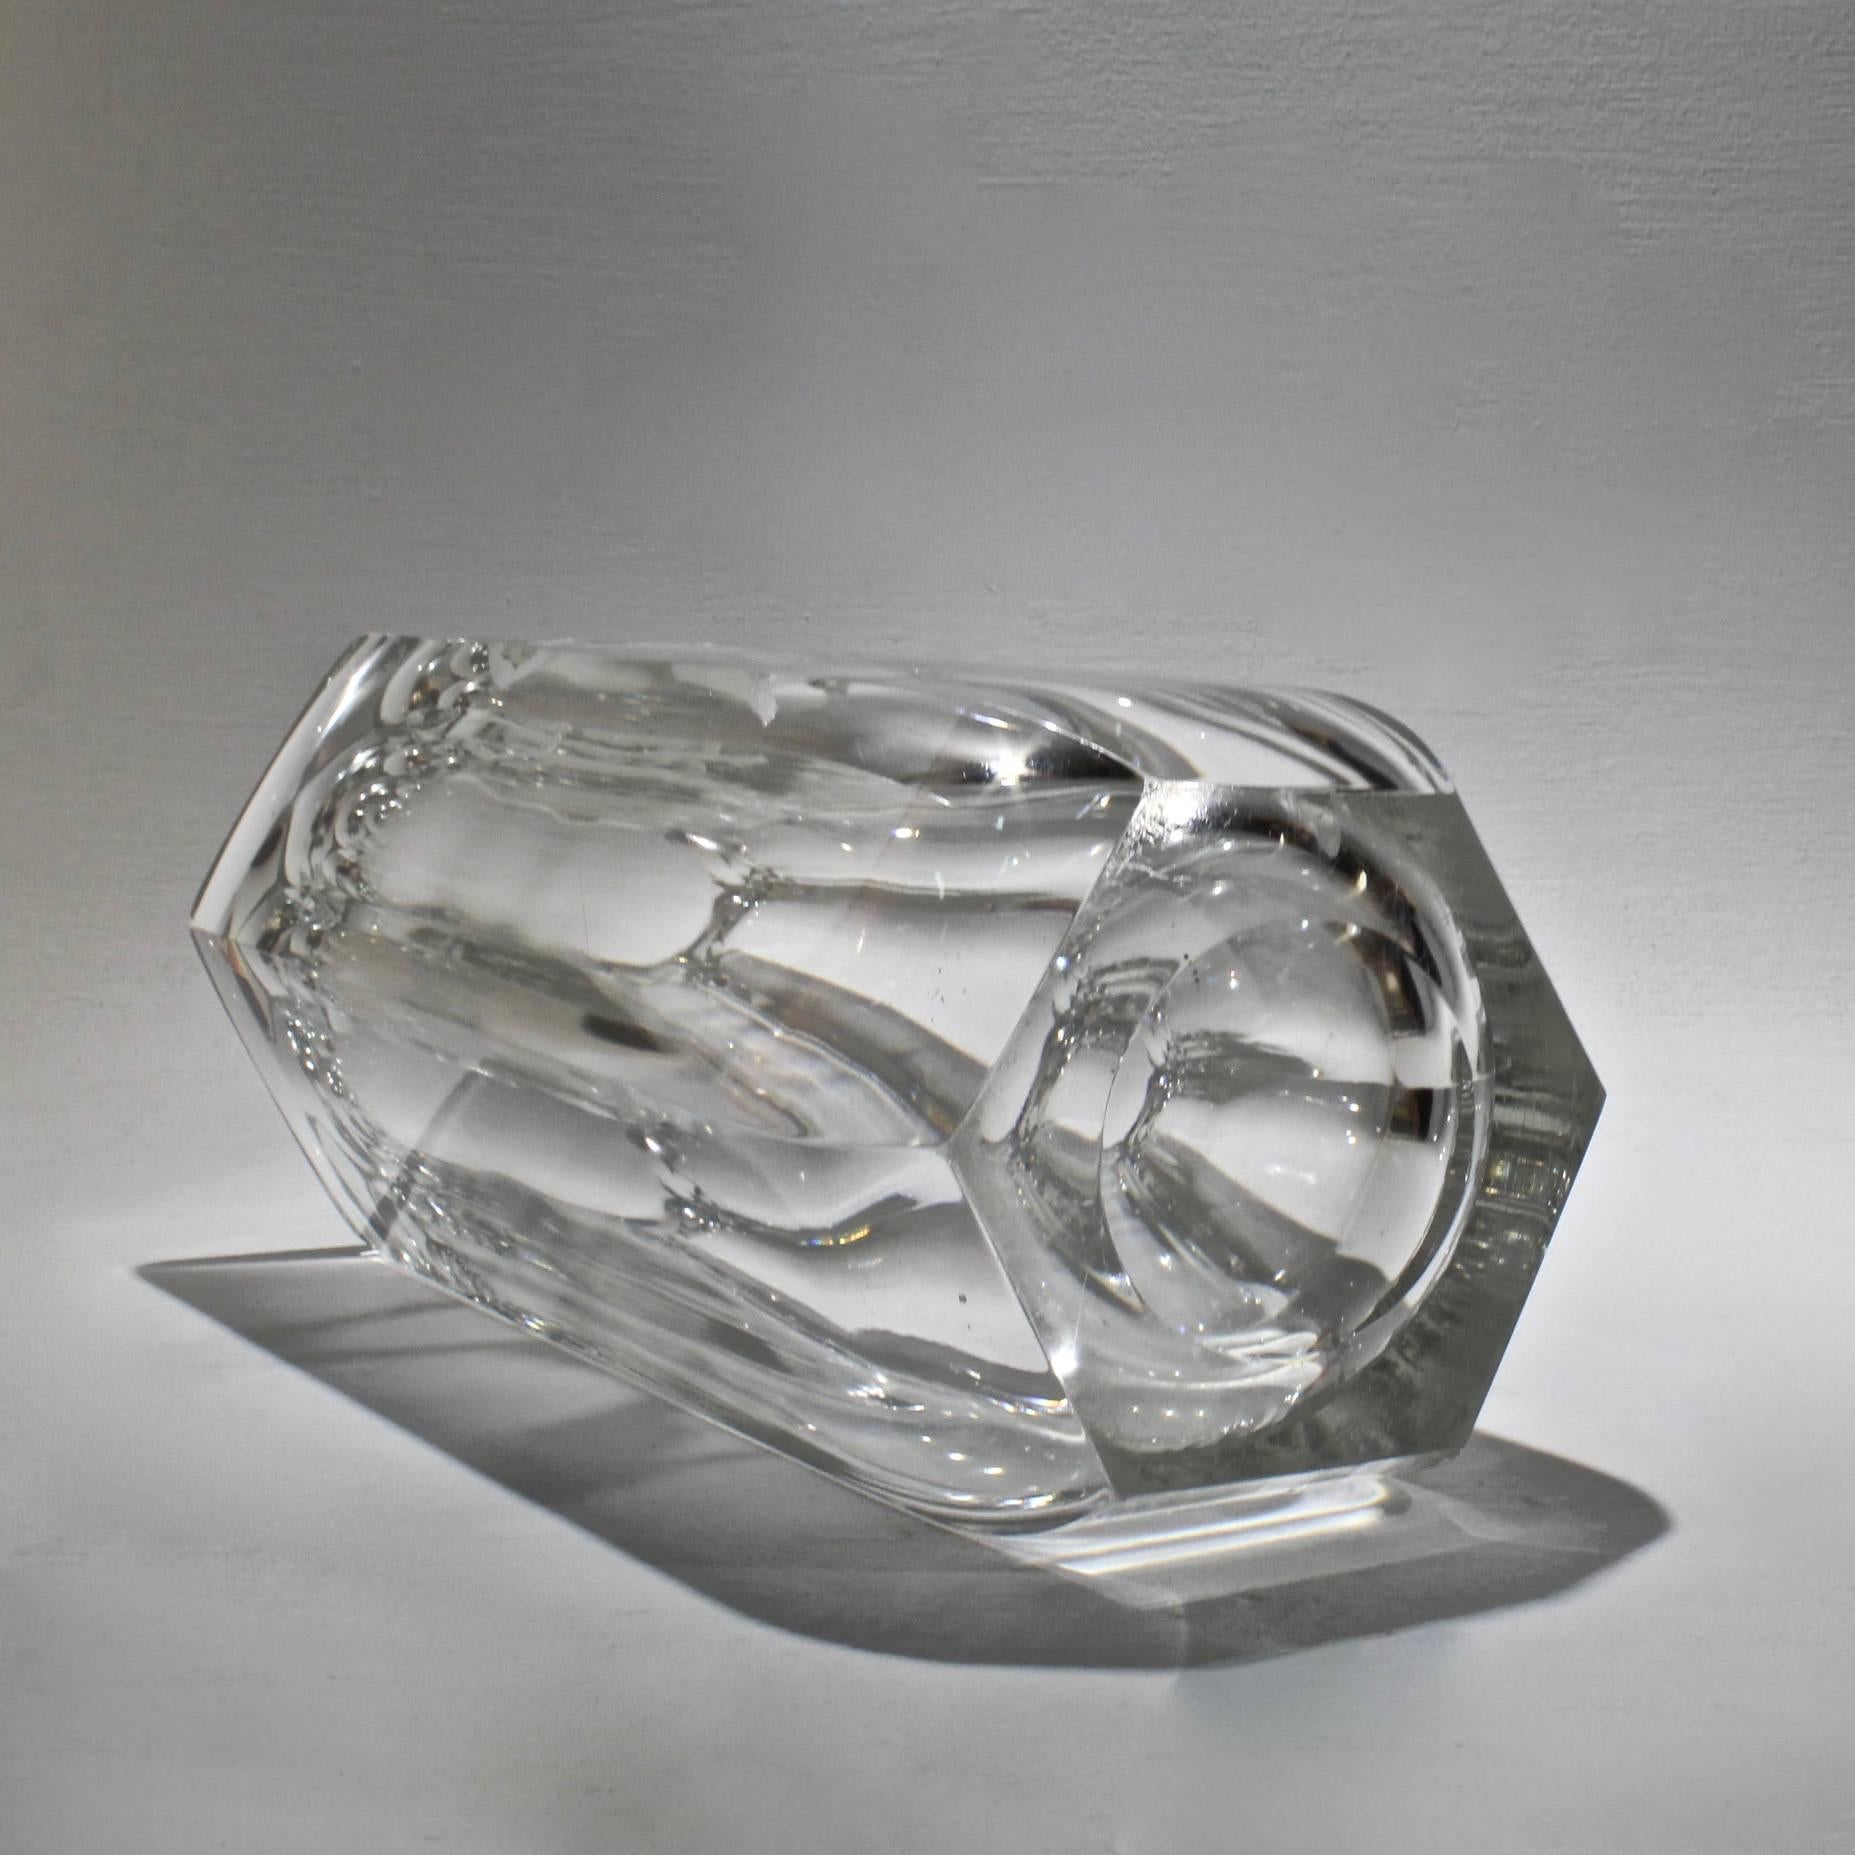 Large Faceted Art Deco Vase with Engraved Mercury by Elis Bergh for Kosta Boda In Good Condition For Sale In Philadelphia, PA